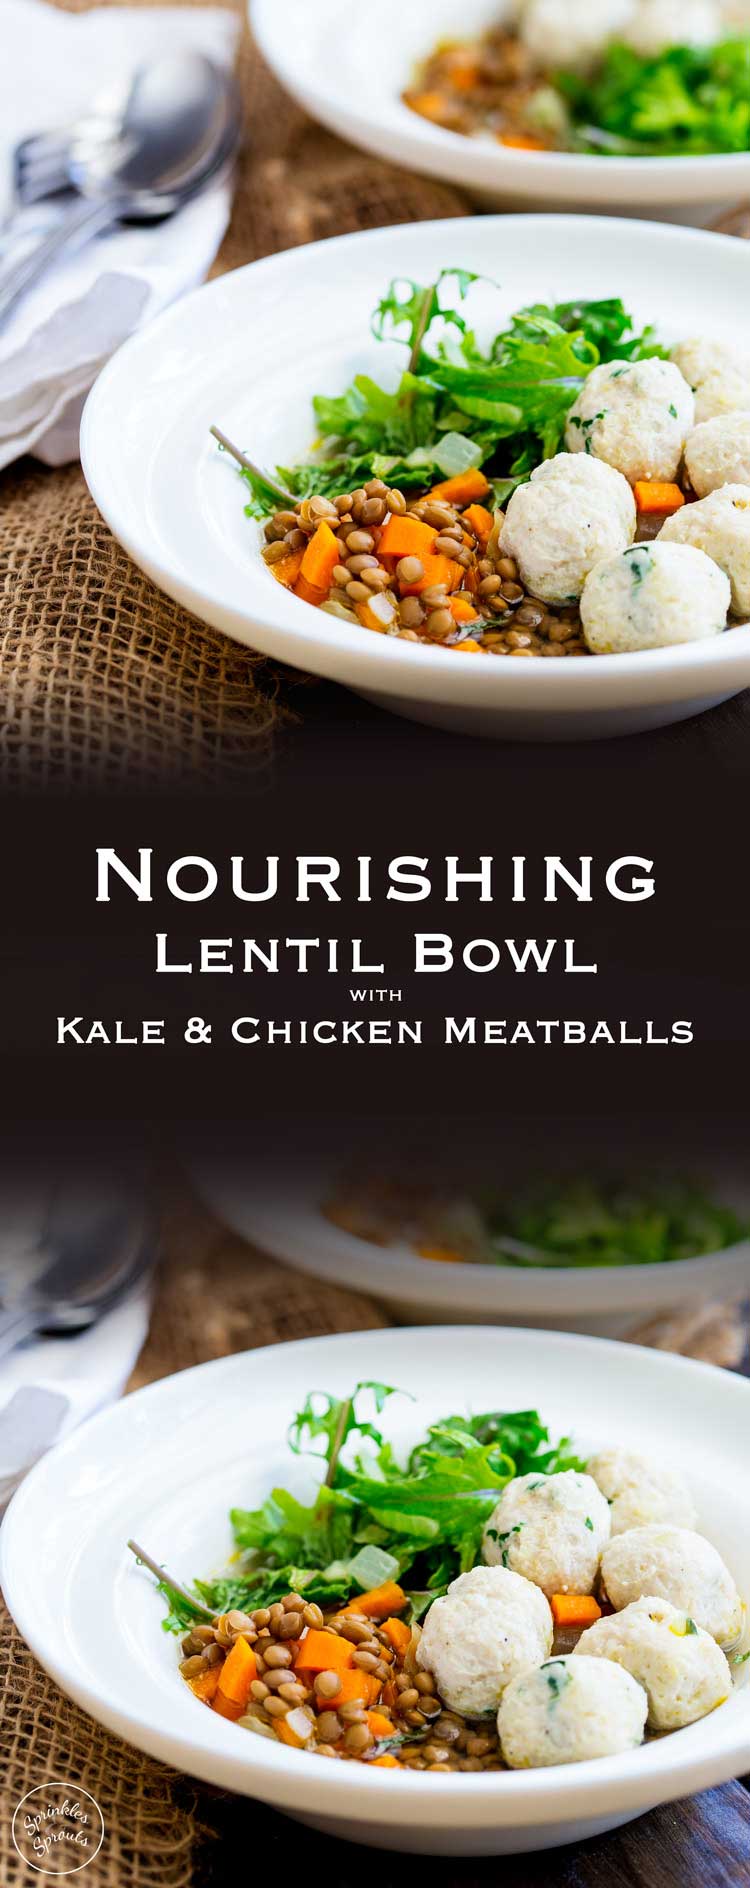 This Lentil Bowl with kale and chicken meatballs is the perfect mix of comfort food and healthy lunch. Hearty and warming without being heavy or stodgy but light enough for a warm day. It really is the dish for all seasons! From Sprinkles and Sprouts